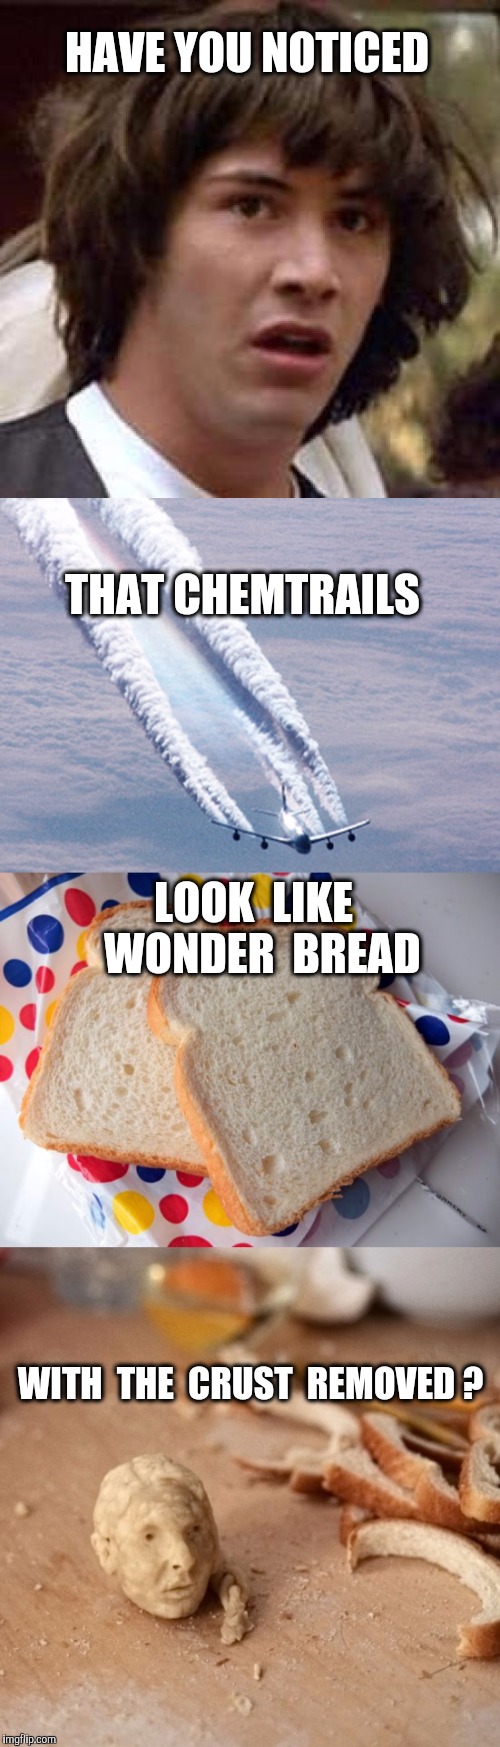 FOOD FOR THOUGHT | HAVE YOU NOTICED; THAT CHEMTRAILS; LOOK  LIKE  WONDER  BREAD; WITH  THE  CRUST  REMOVED ? | image tagged in conspiracy keanu,chemtrails,chemtrail,bread | made w/ Imgflip meme maker